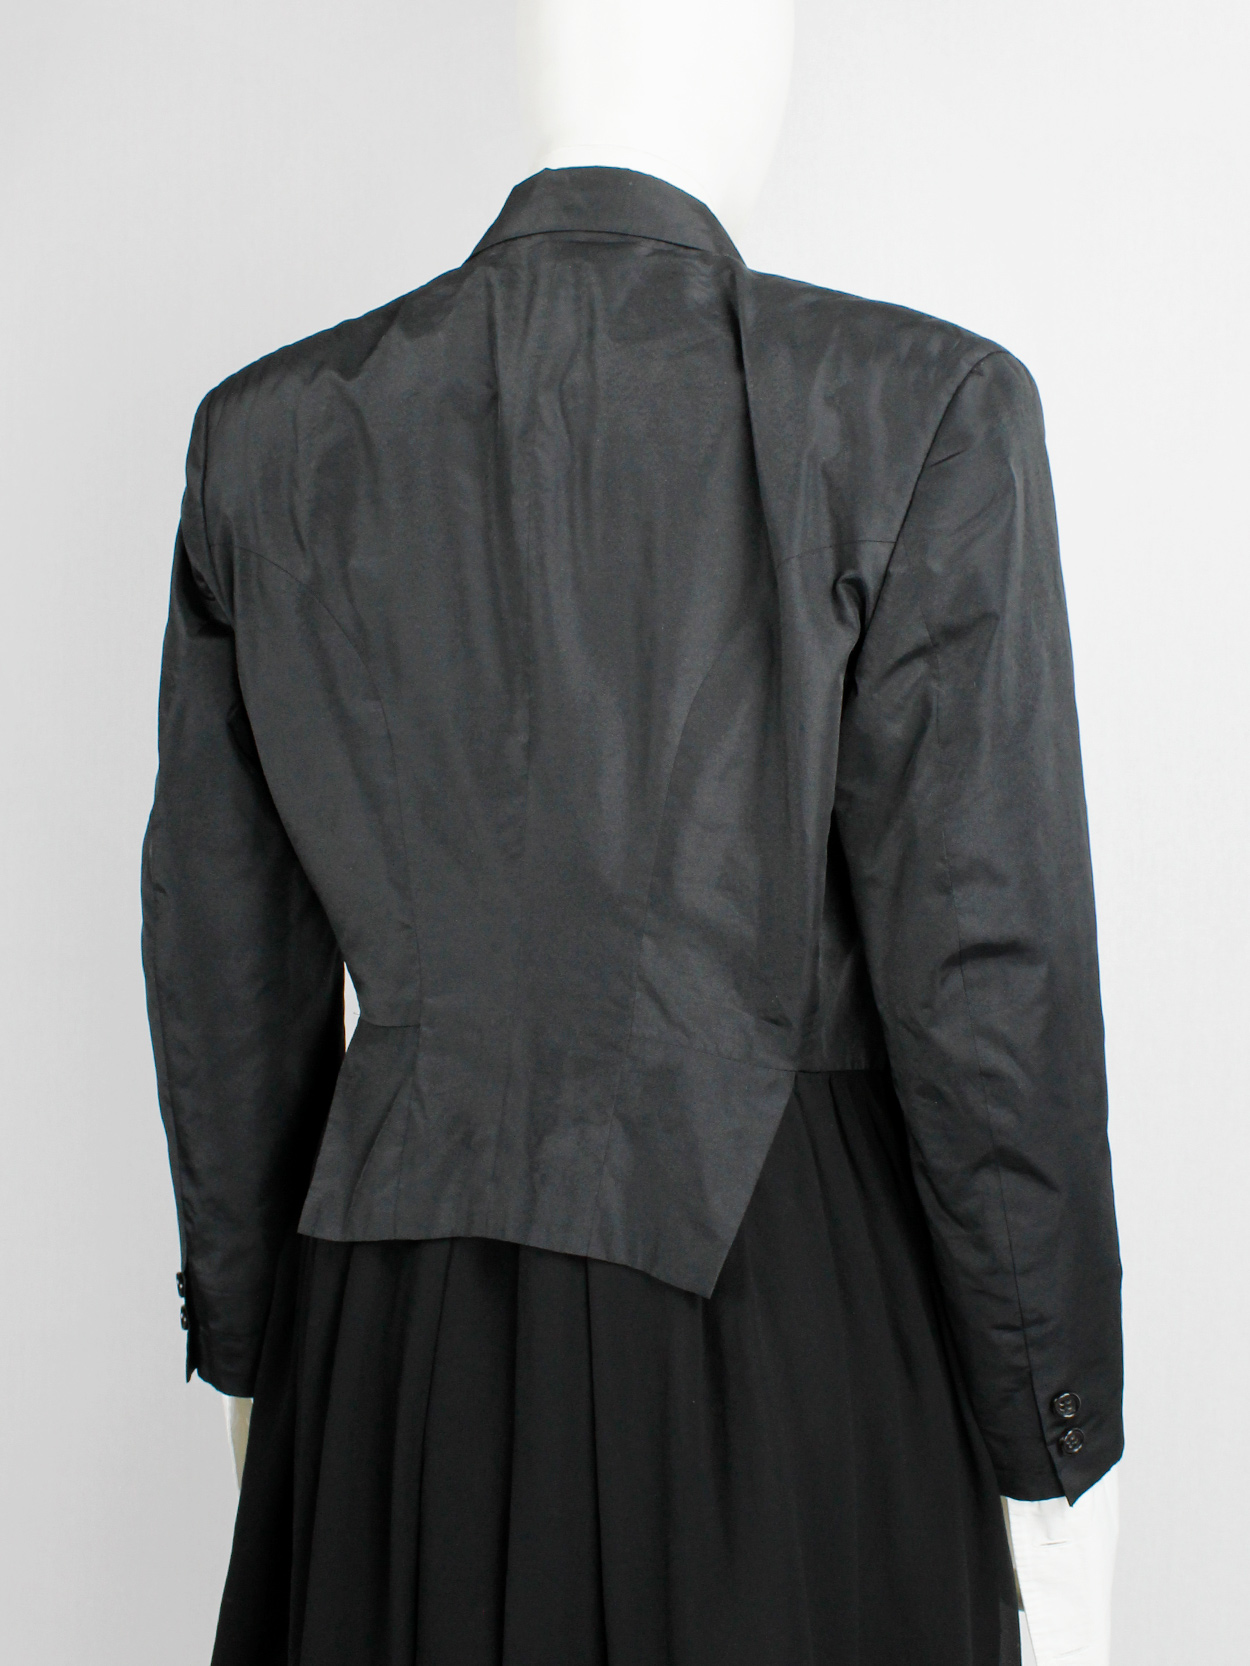 Comme des Garçons black tailcoat with attached inner waistcoat AD 1988 (11)